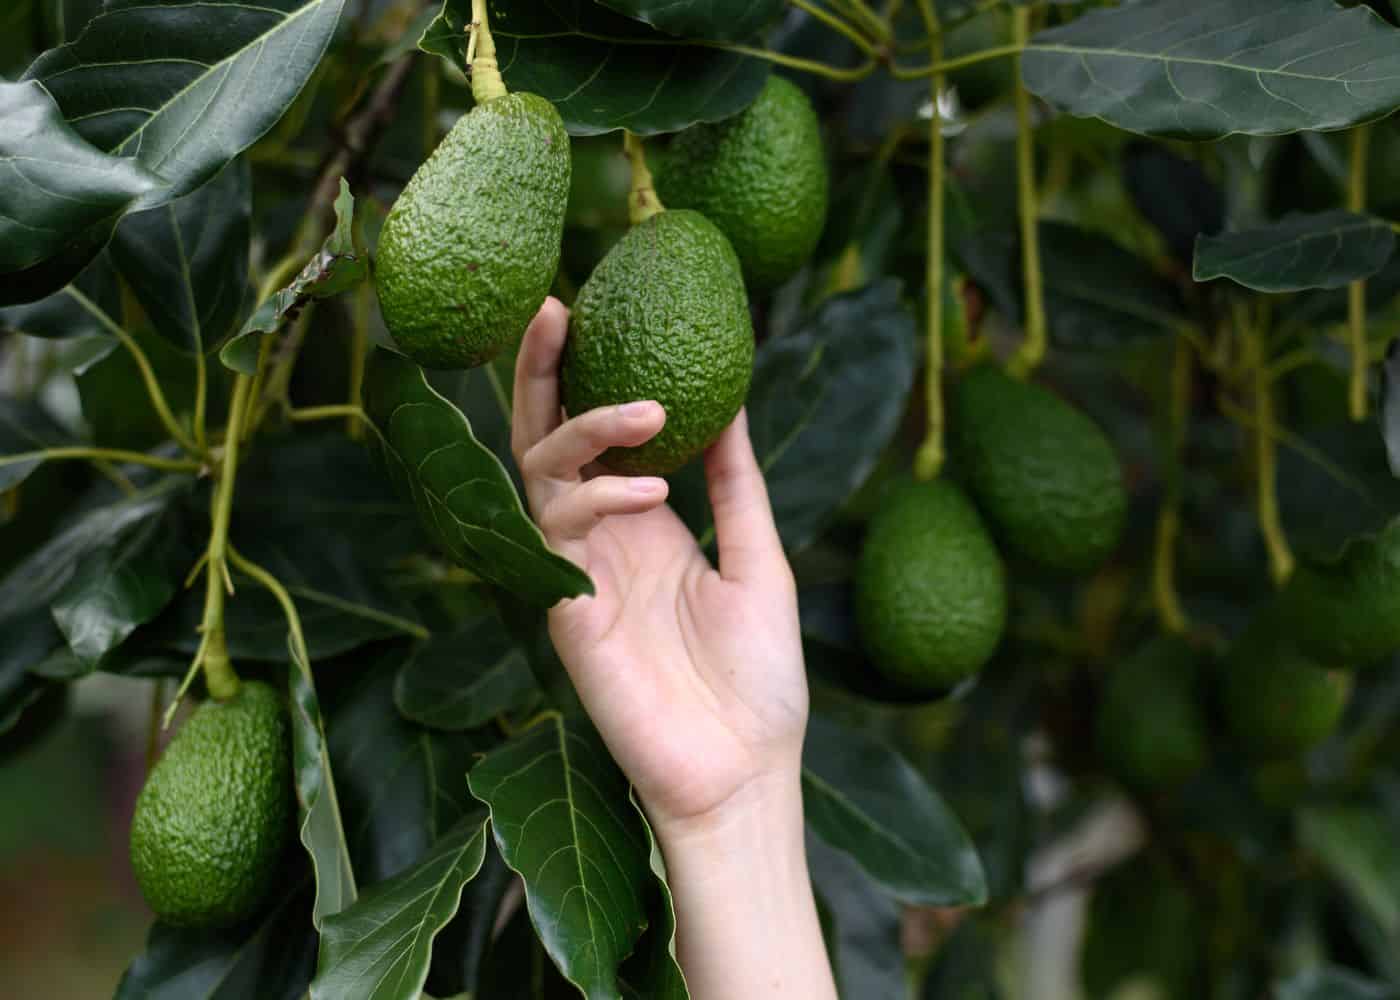 Harvesting from a hass avocado tree